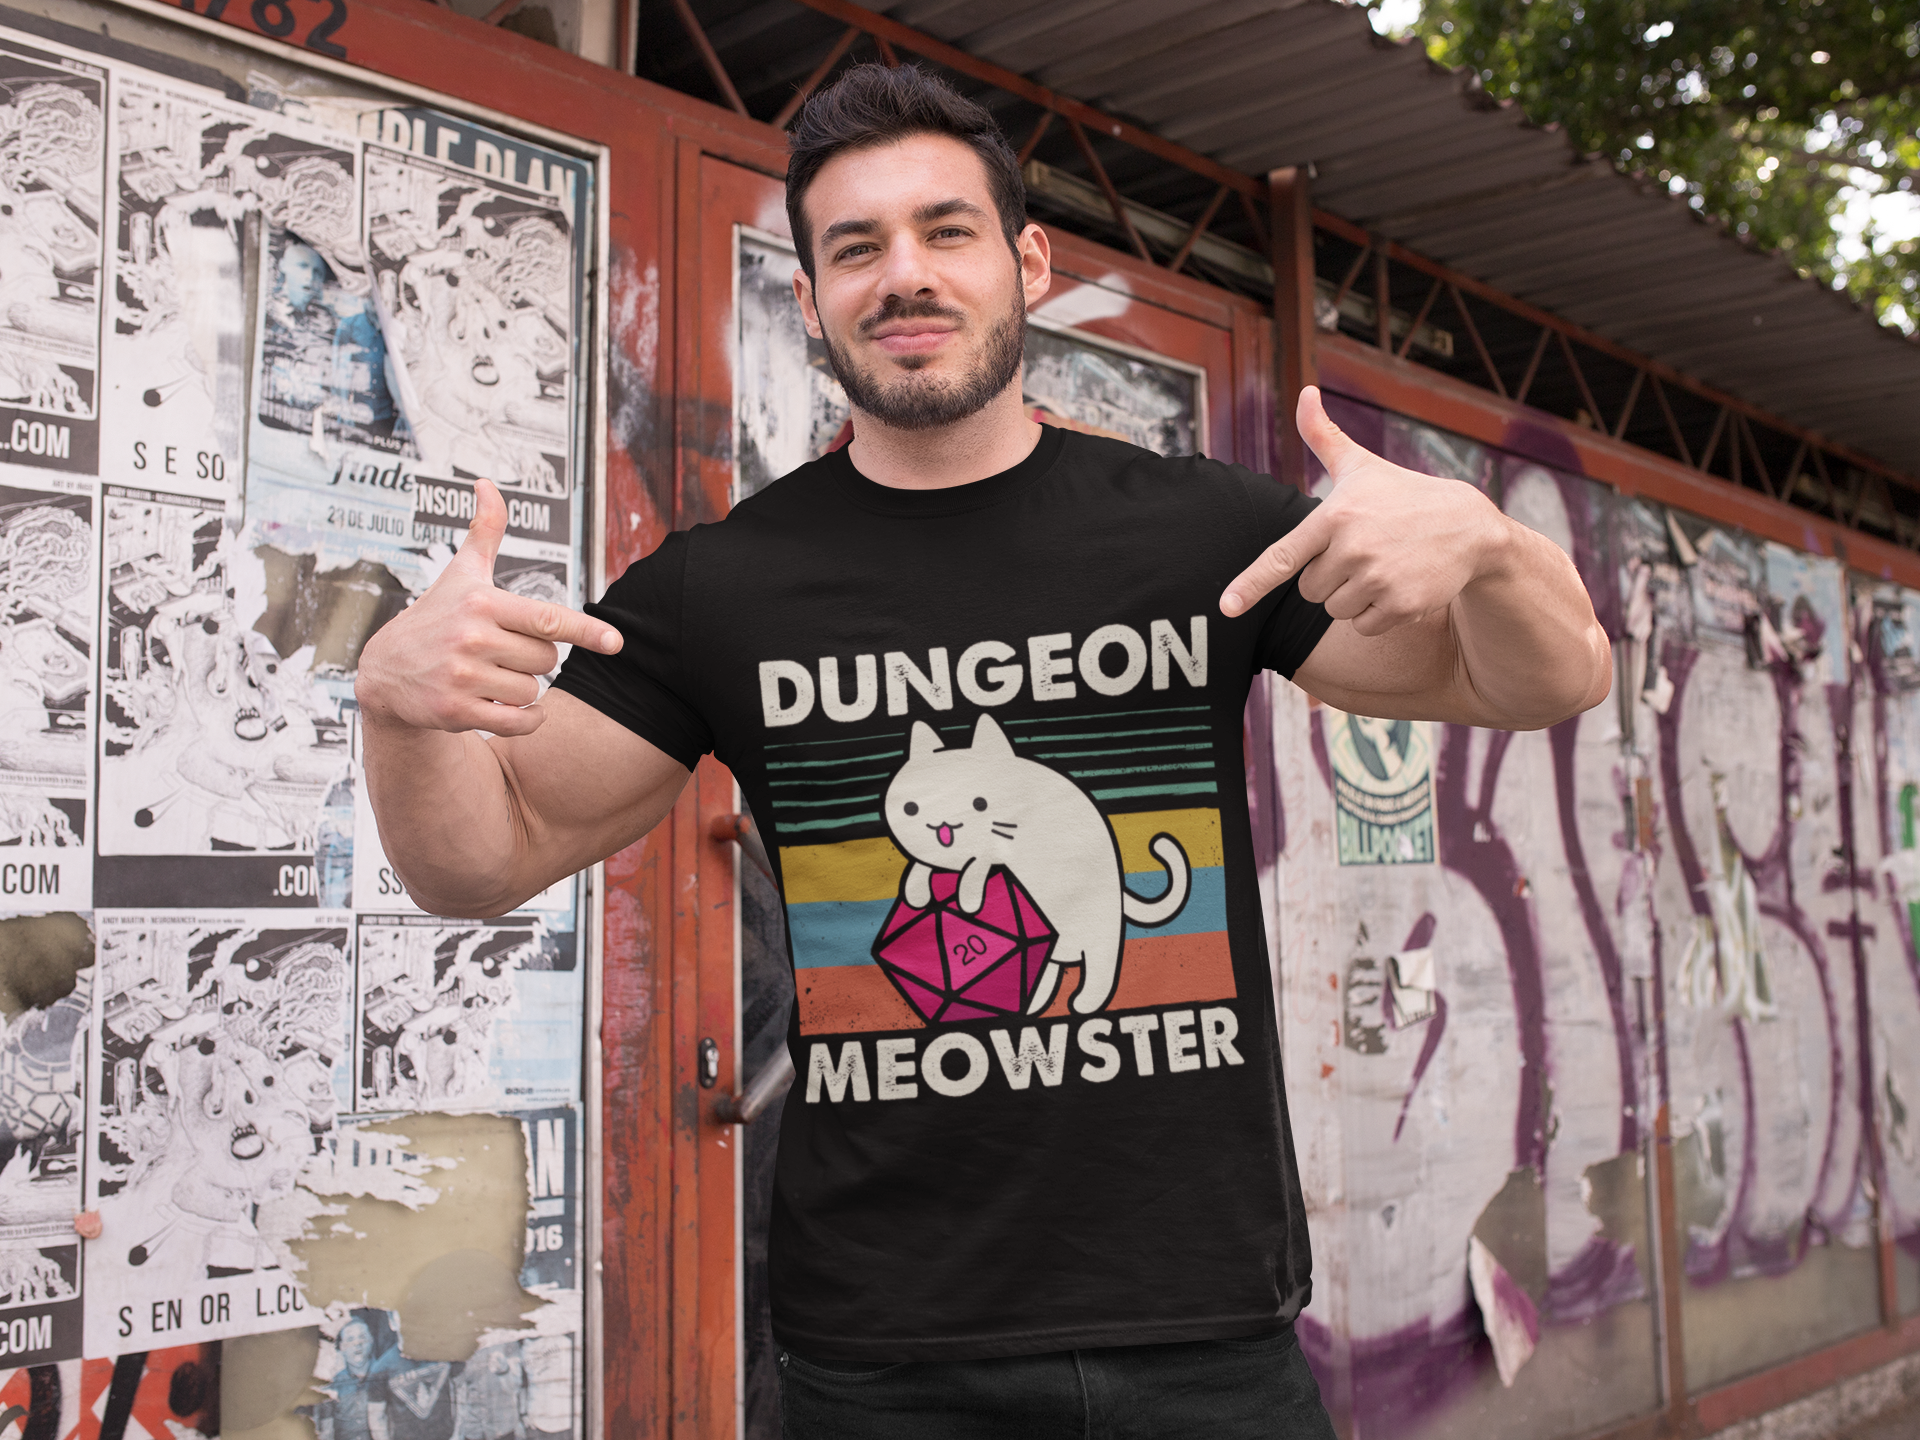 Dungeon And Dragon T Shirt, Dungeon Meowster DND T Shirt, RPG Dice Games Tshirt